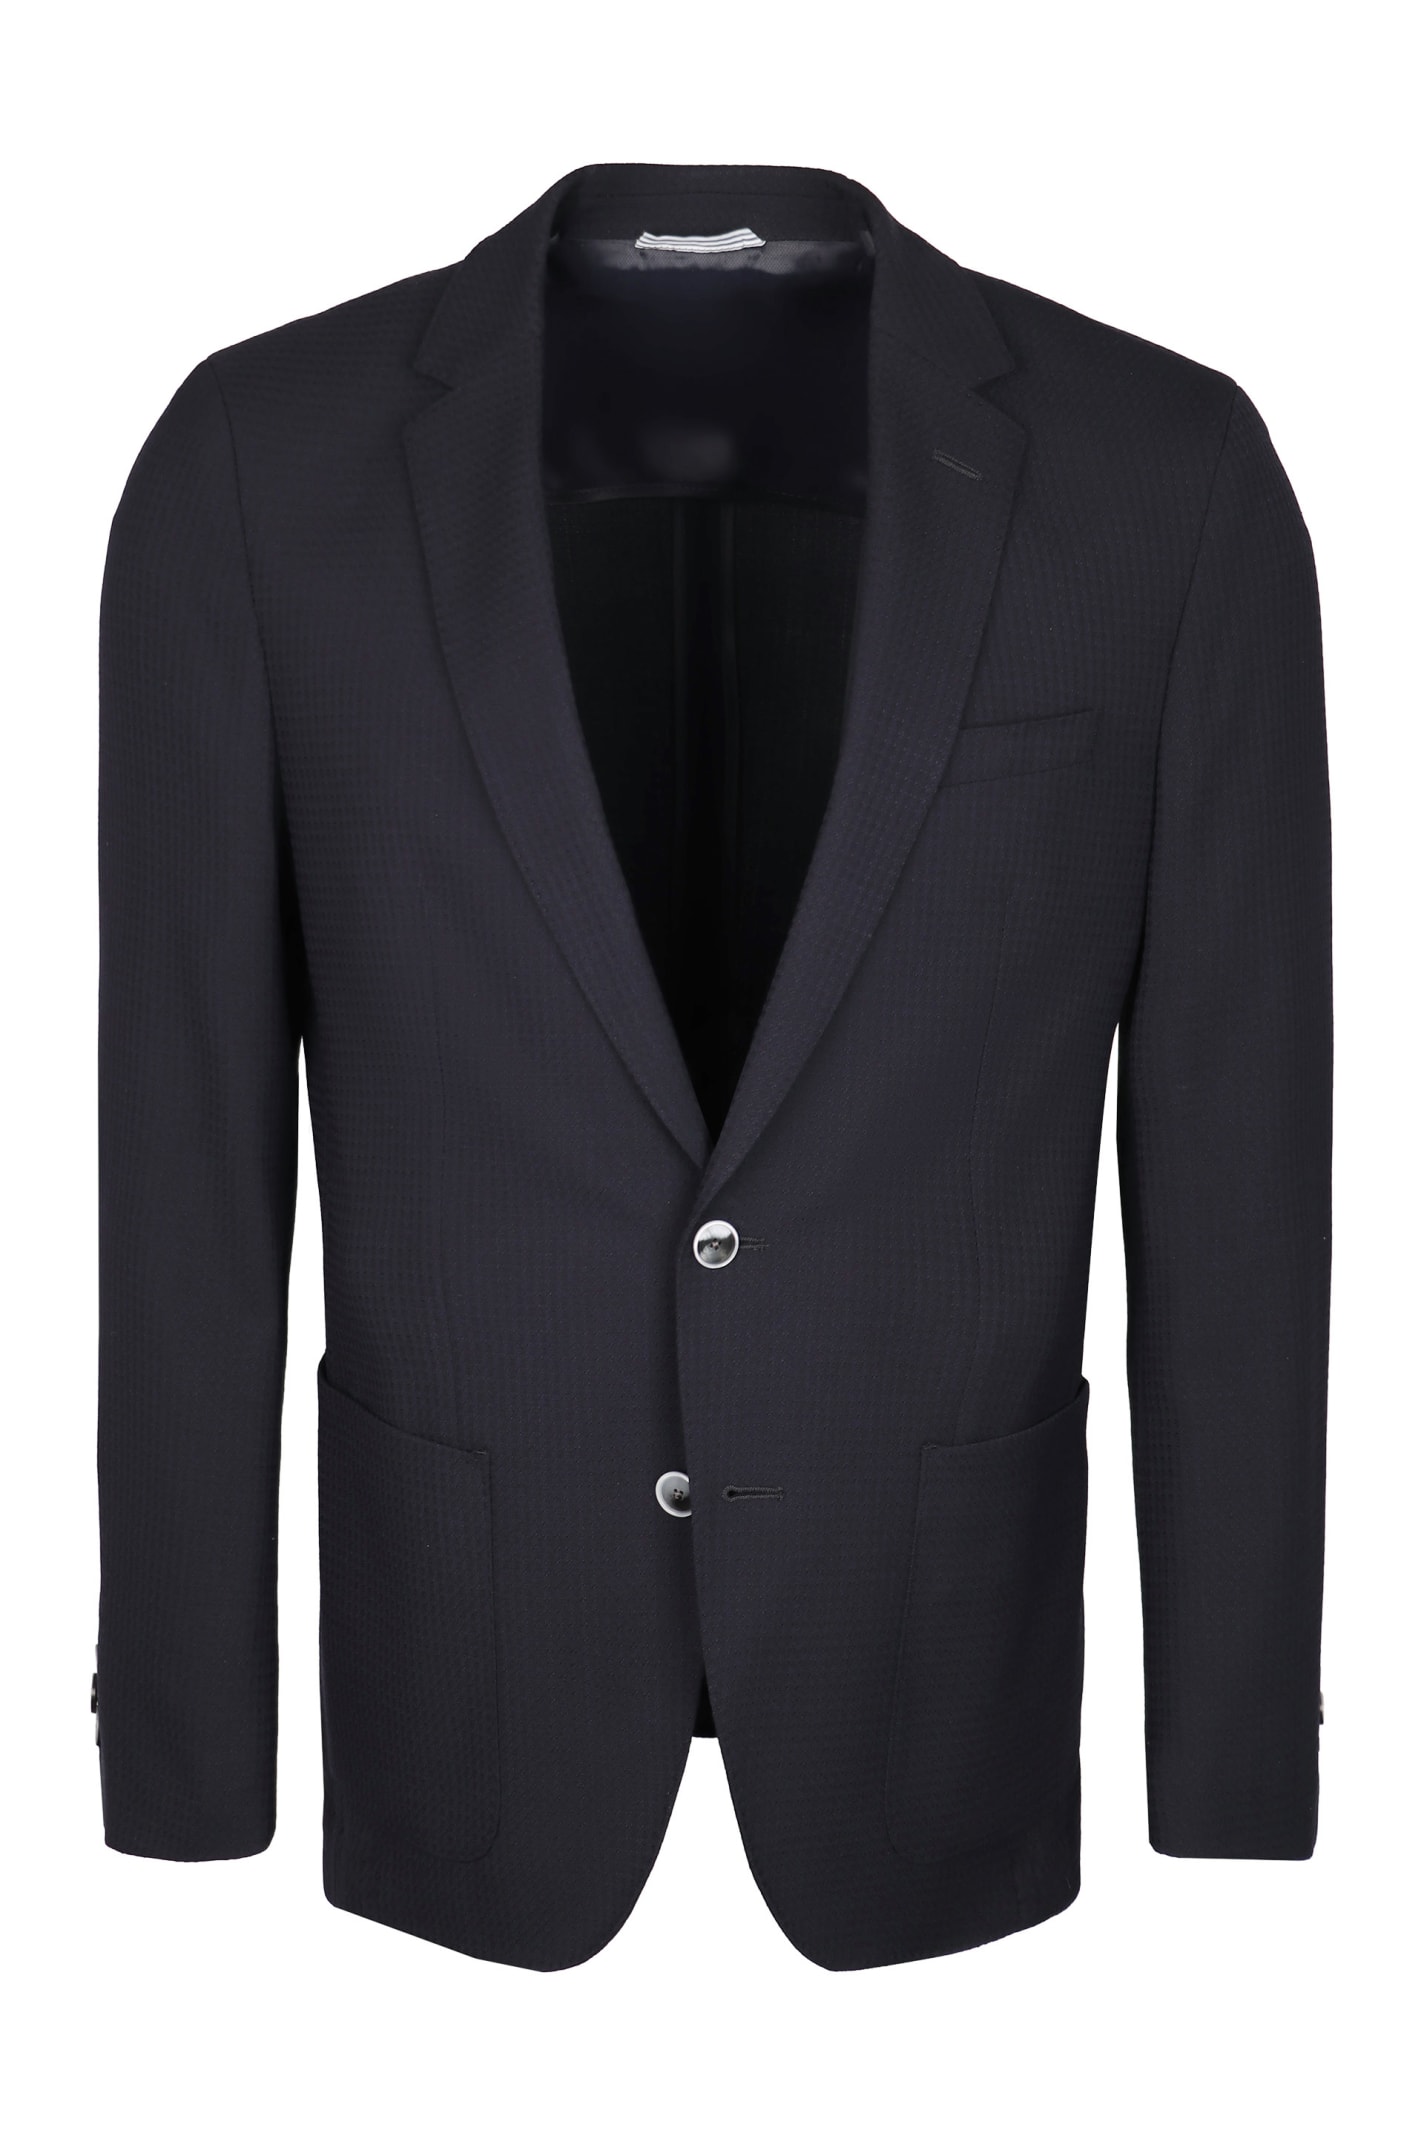 Hugo Boss Halyon Single-breasted Two Button Jacket